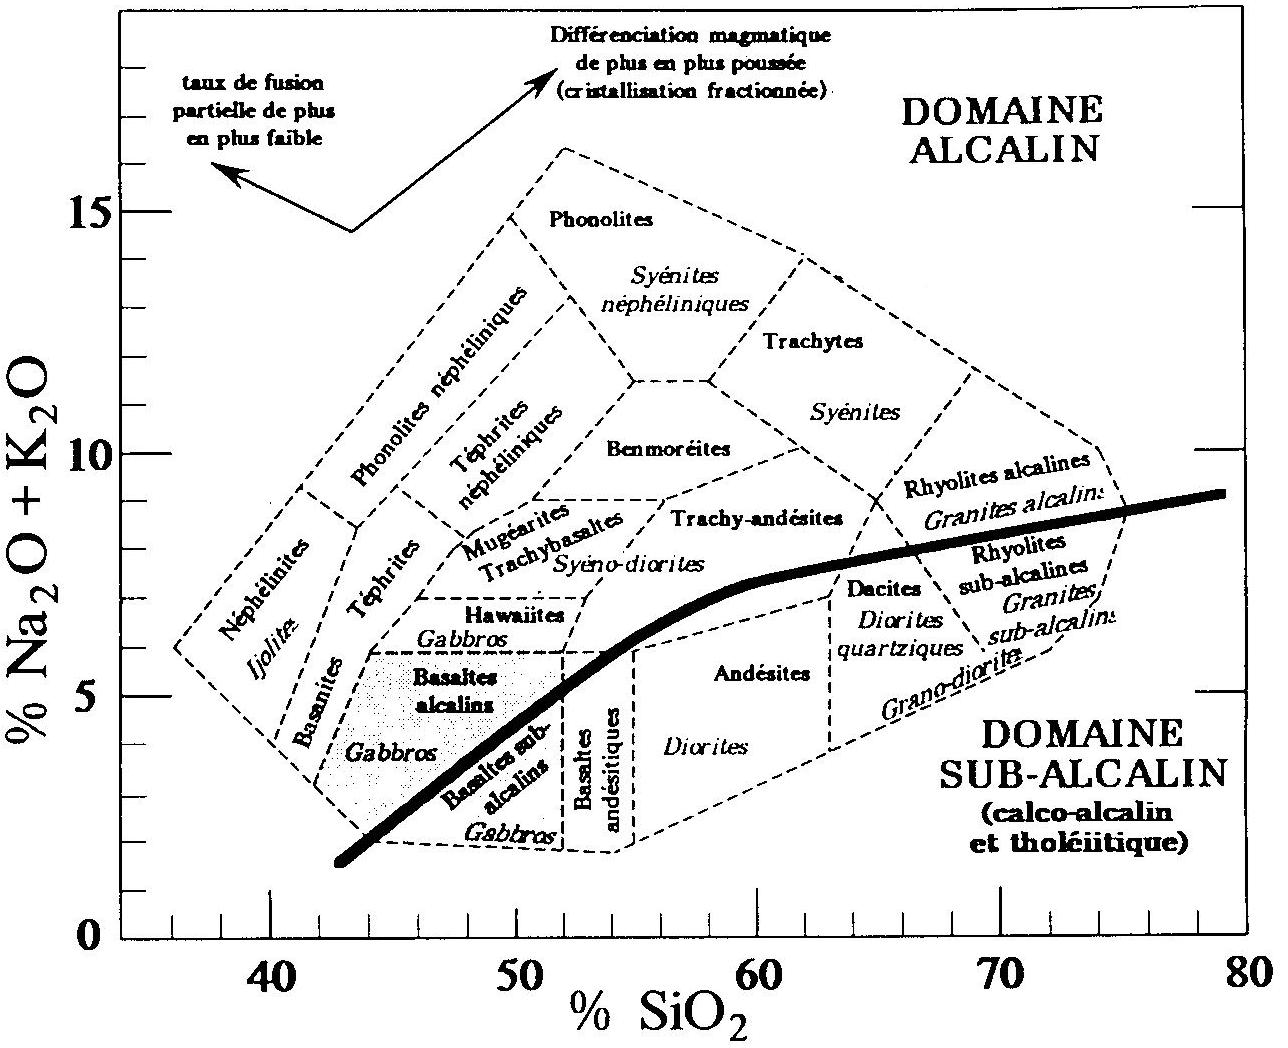 Classification des roches magmatiques